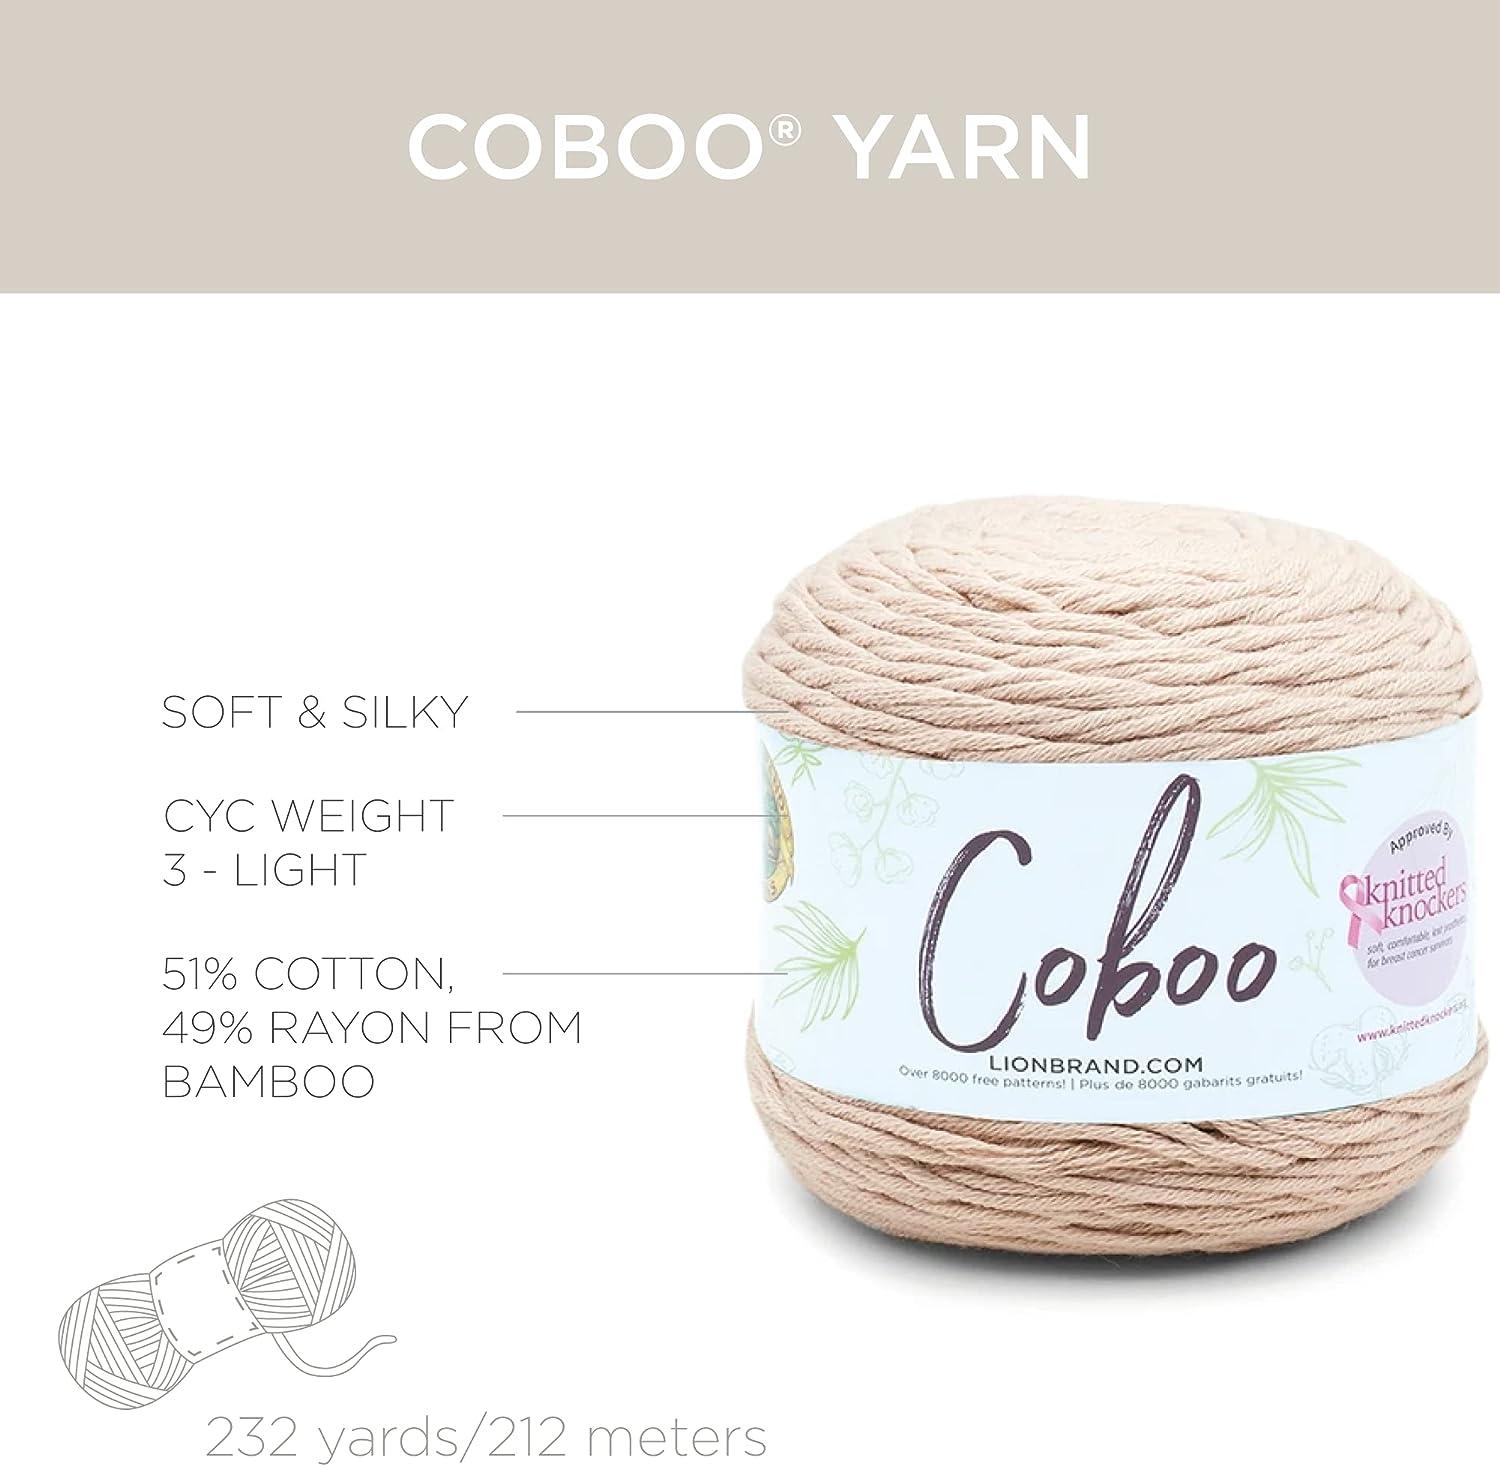 Knit & Crochet Stores - Coboo by Lion Brand: The perfect yarn for